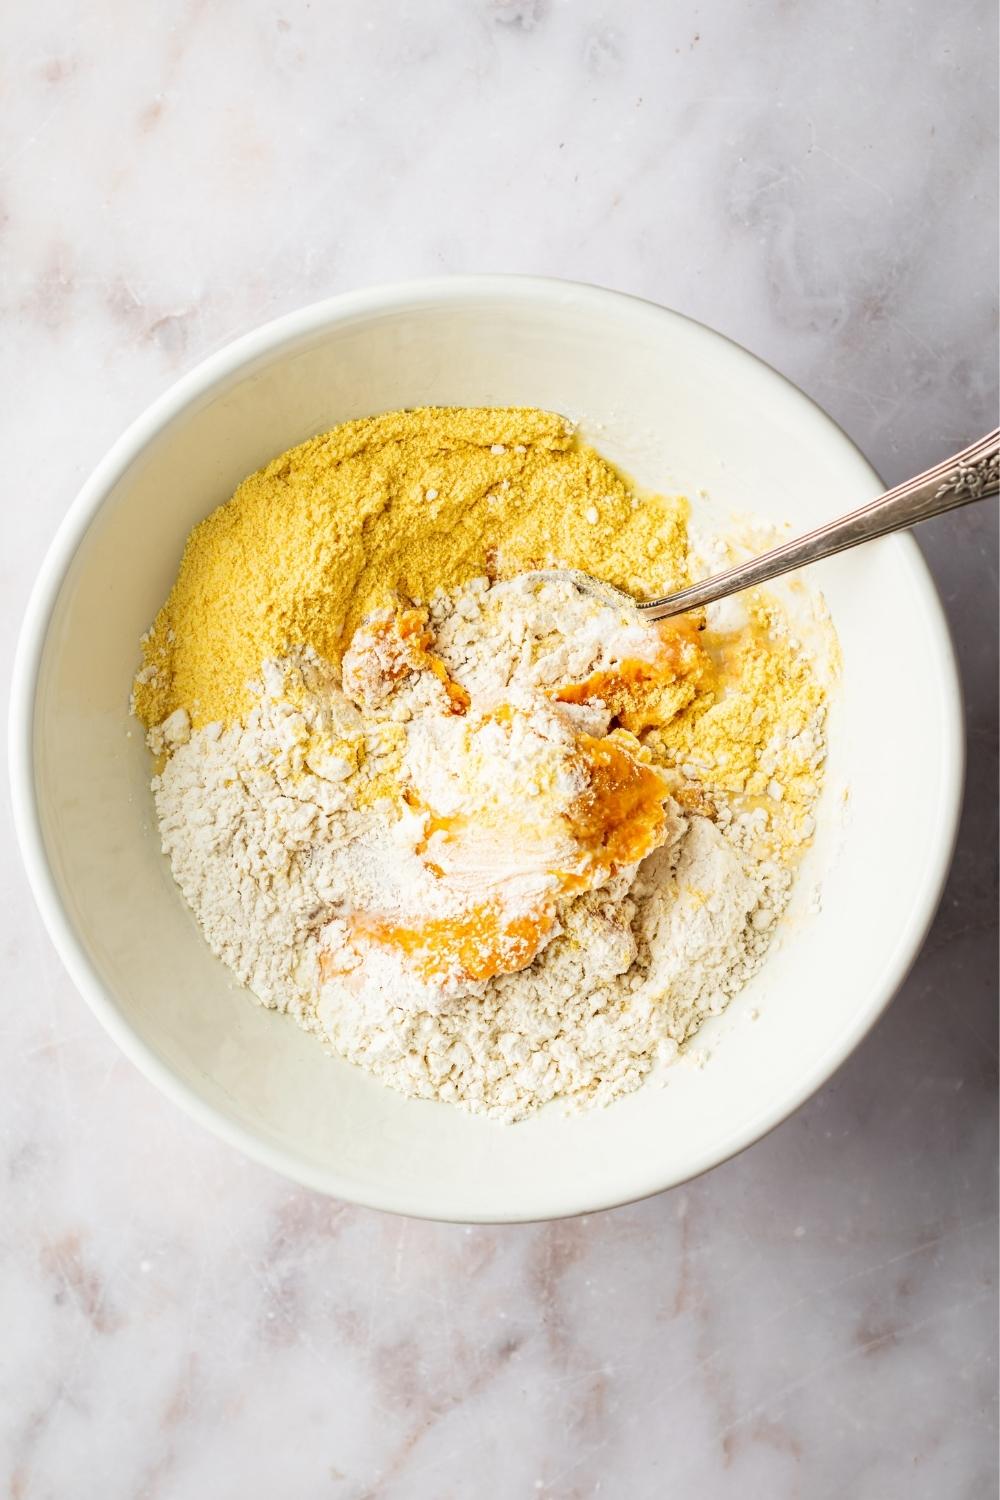 Flour, mashed sweet potato, and cornmeal in a bowl with a spoon in it.